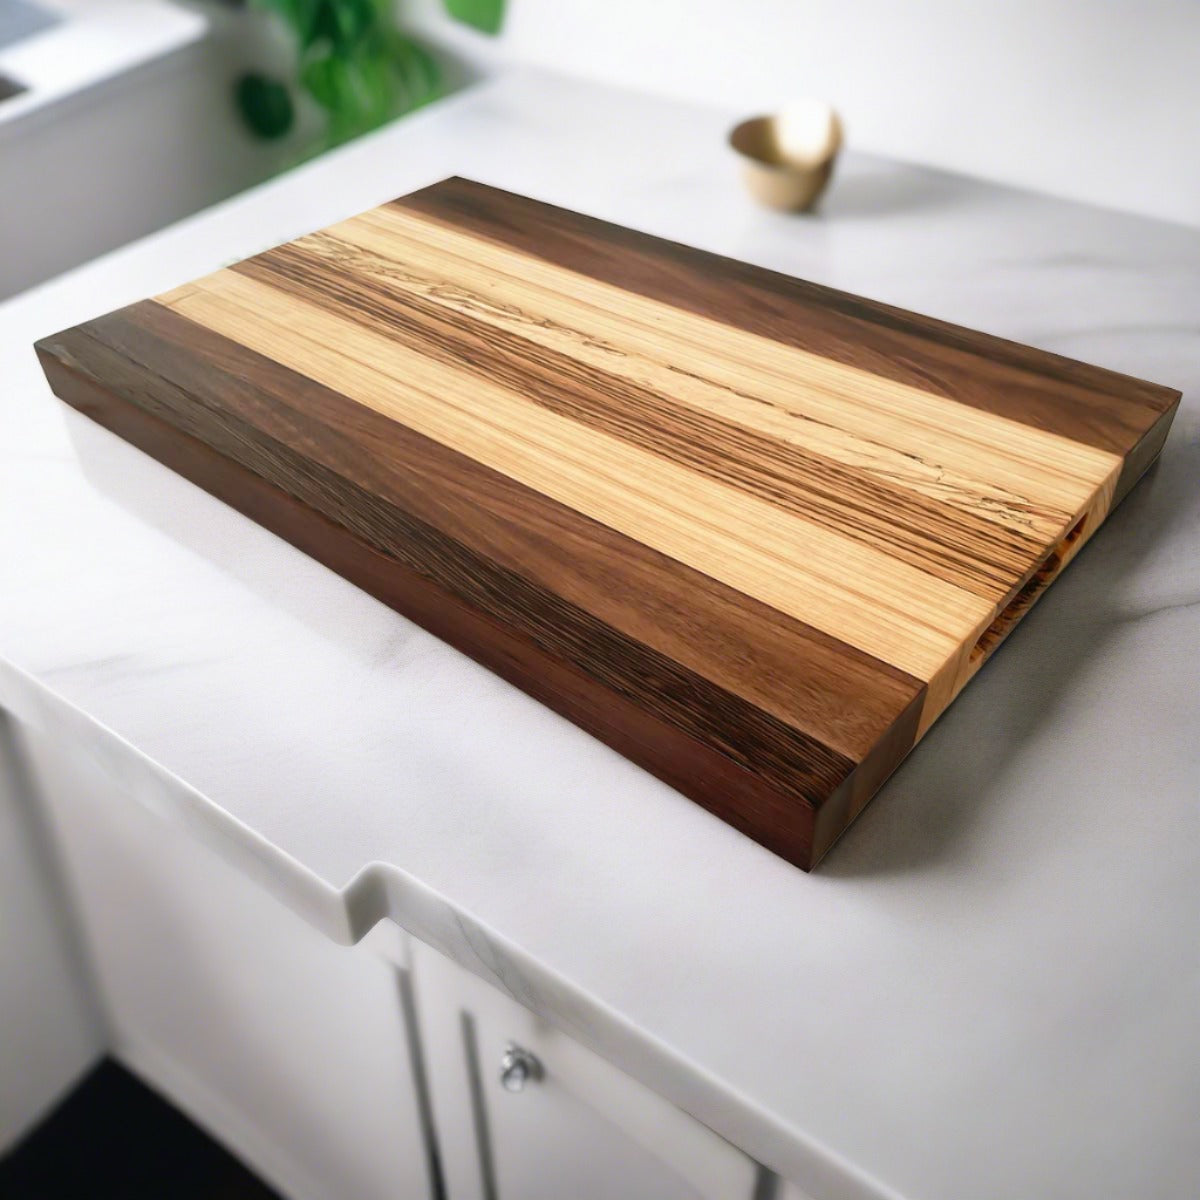 Walnut + Cypress + Wenge Edge Grain Over The Counter Cutting Board "The Lonsdale"